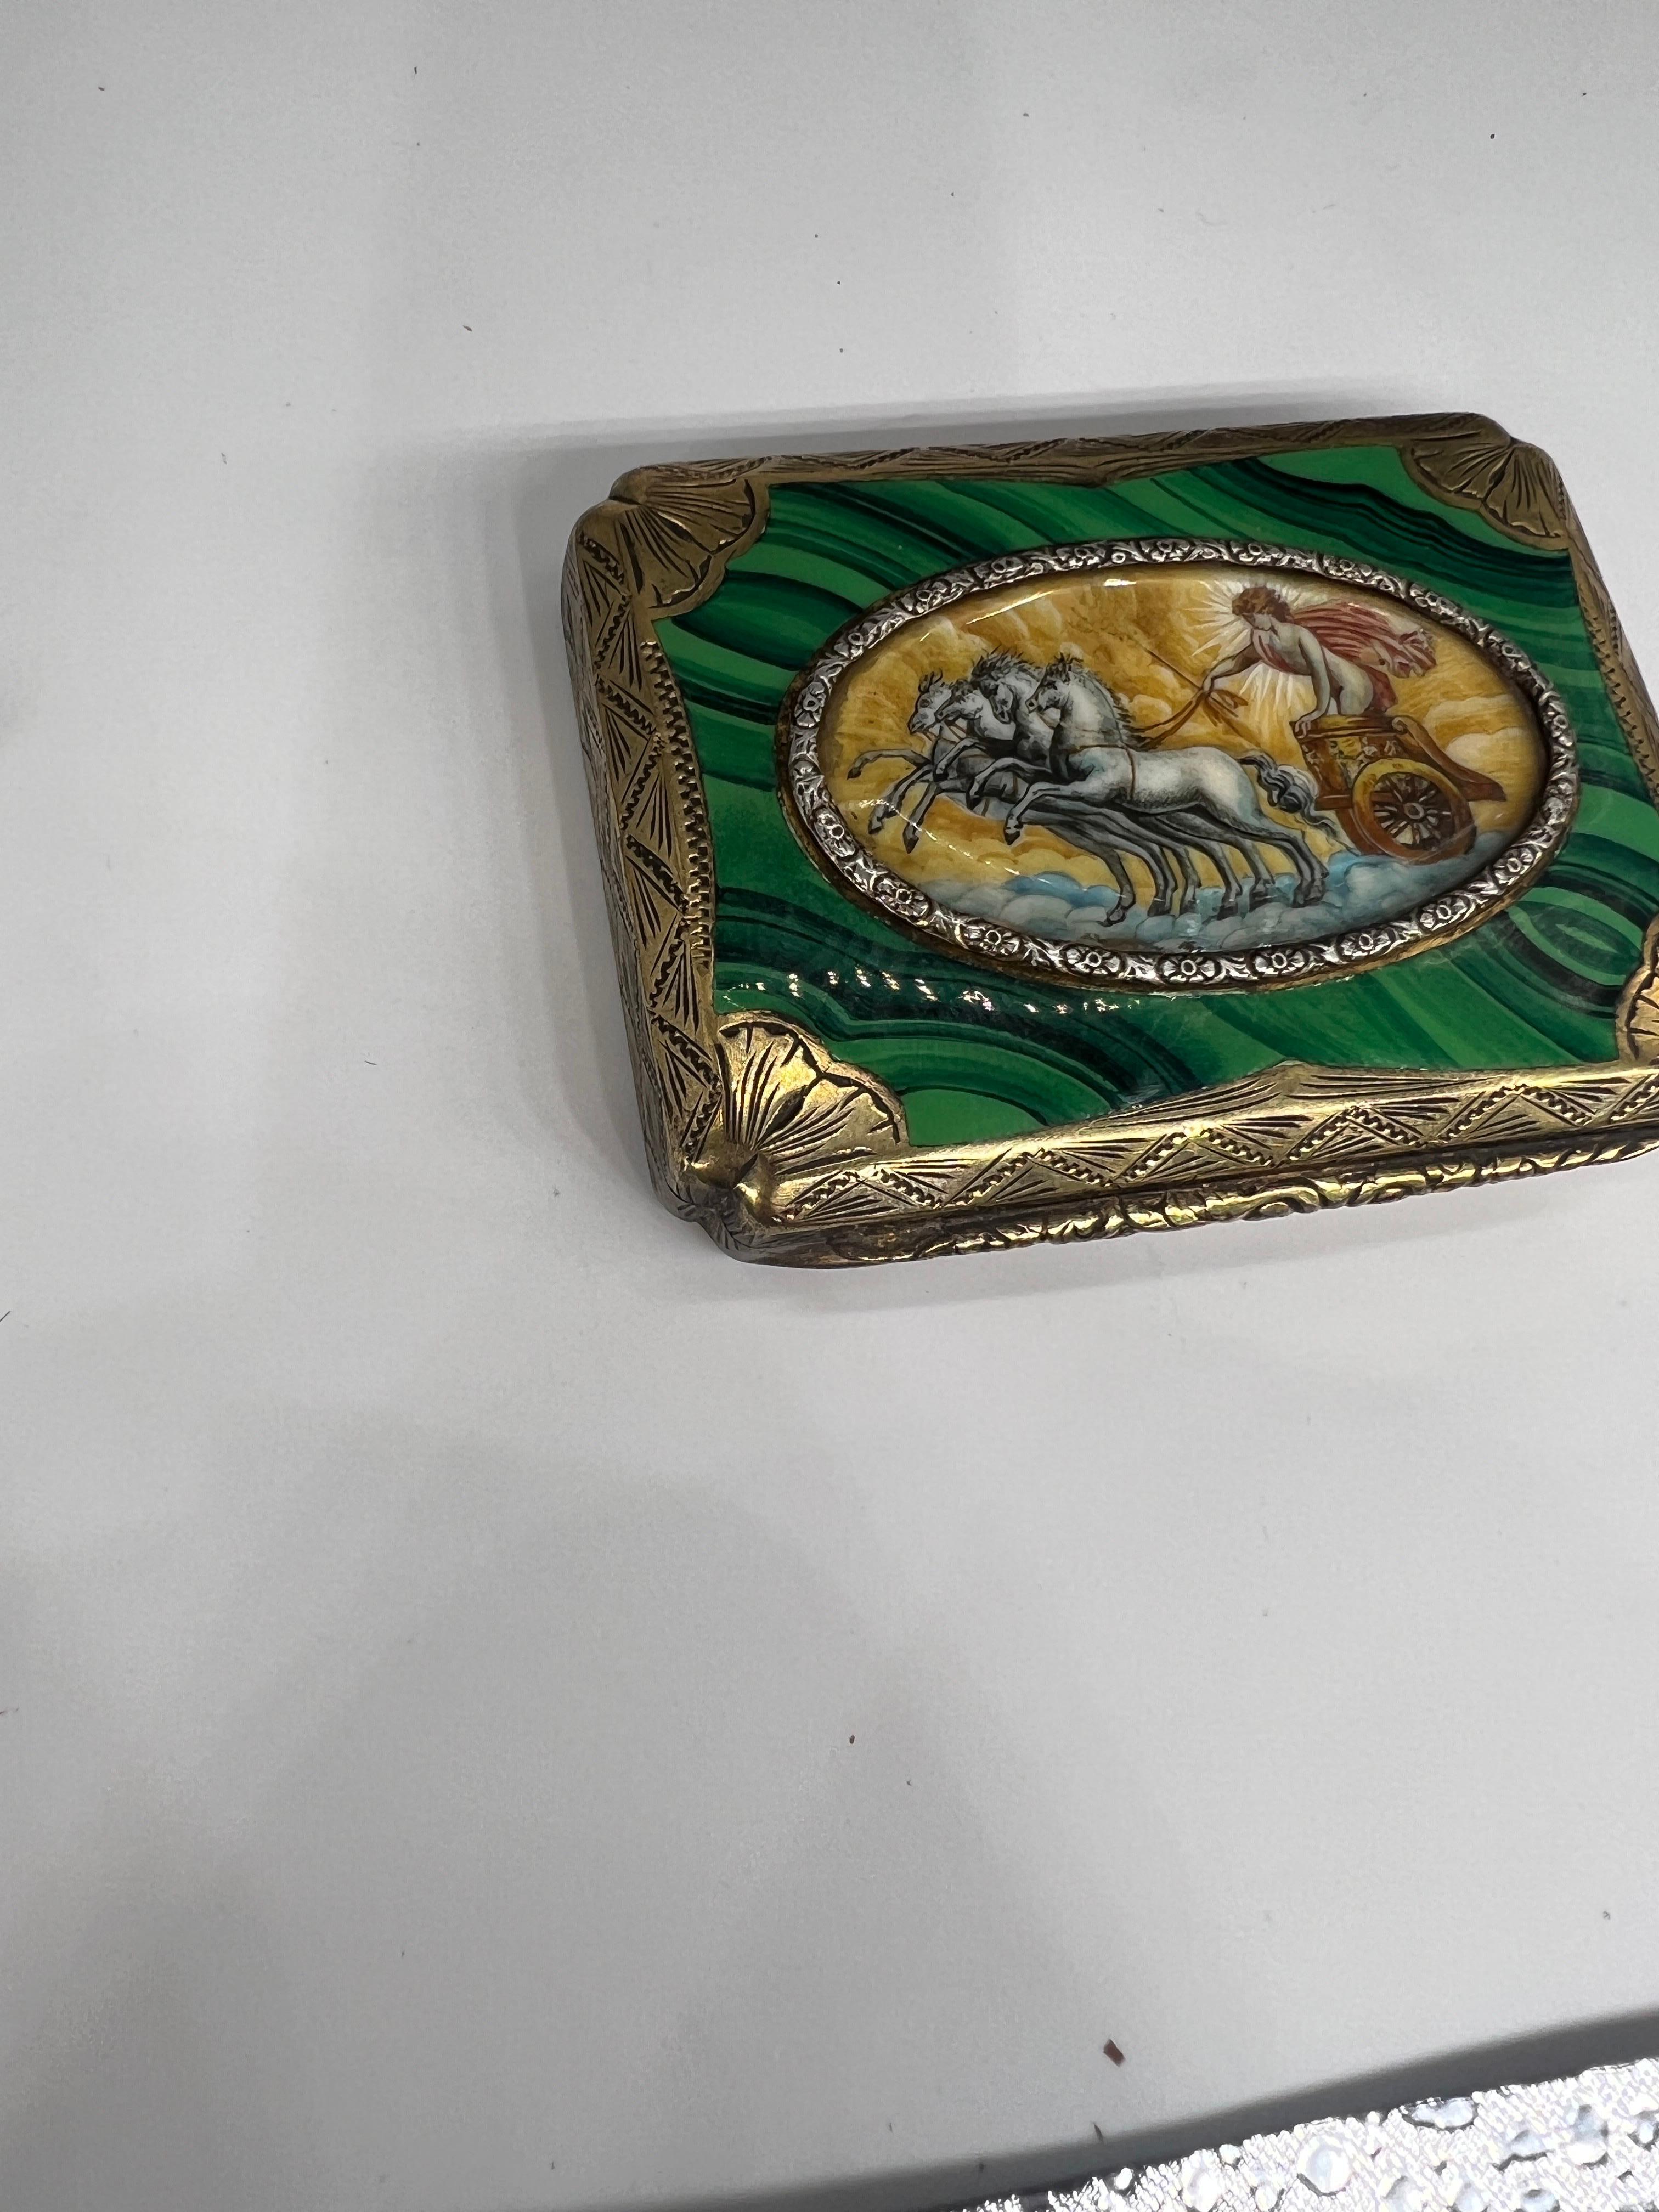 Italian Grand Tour 800 Silver, Enameled Malachite & Painted Roman Scene Box.

This fantastic antique box is rectangular in form heavily decorated with hand chased foliate scroll work, fan form corners accenting the hand enameled faux malachite